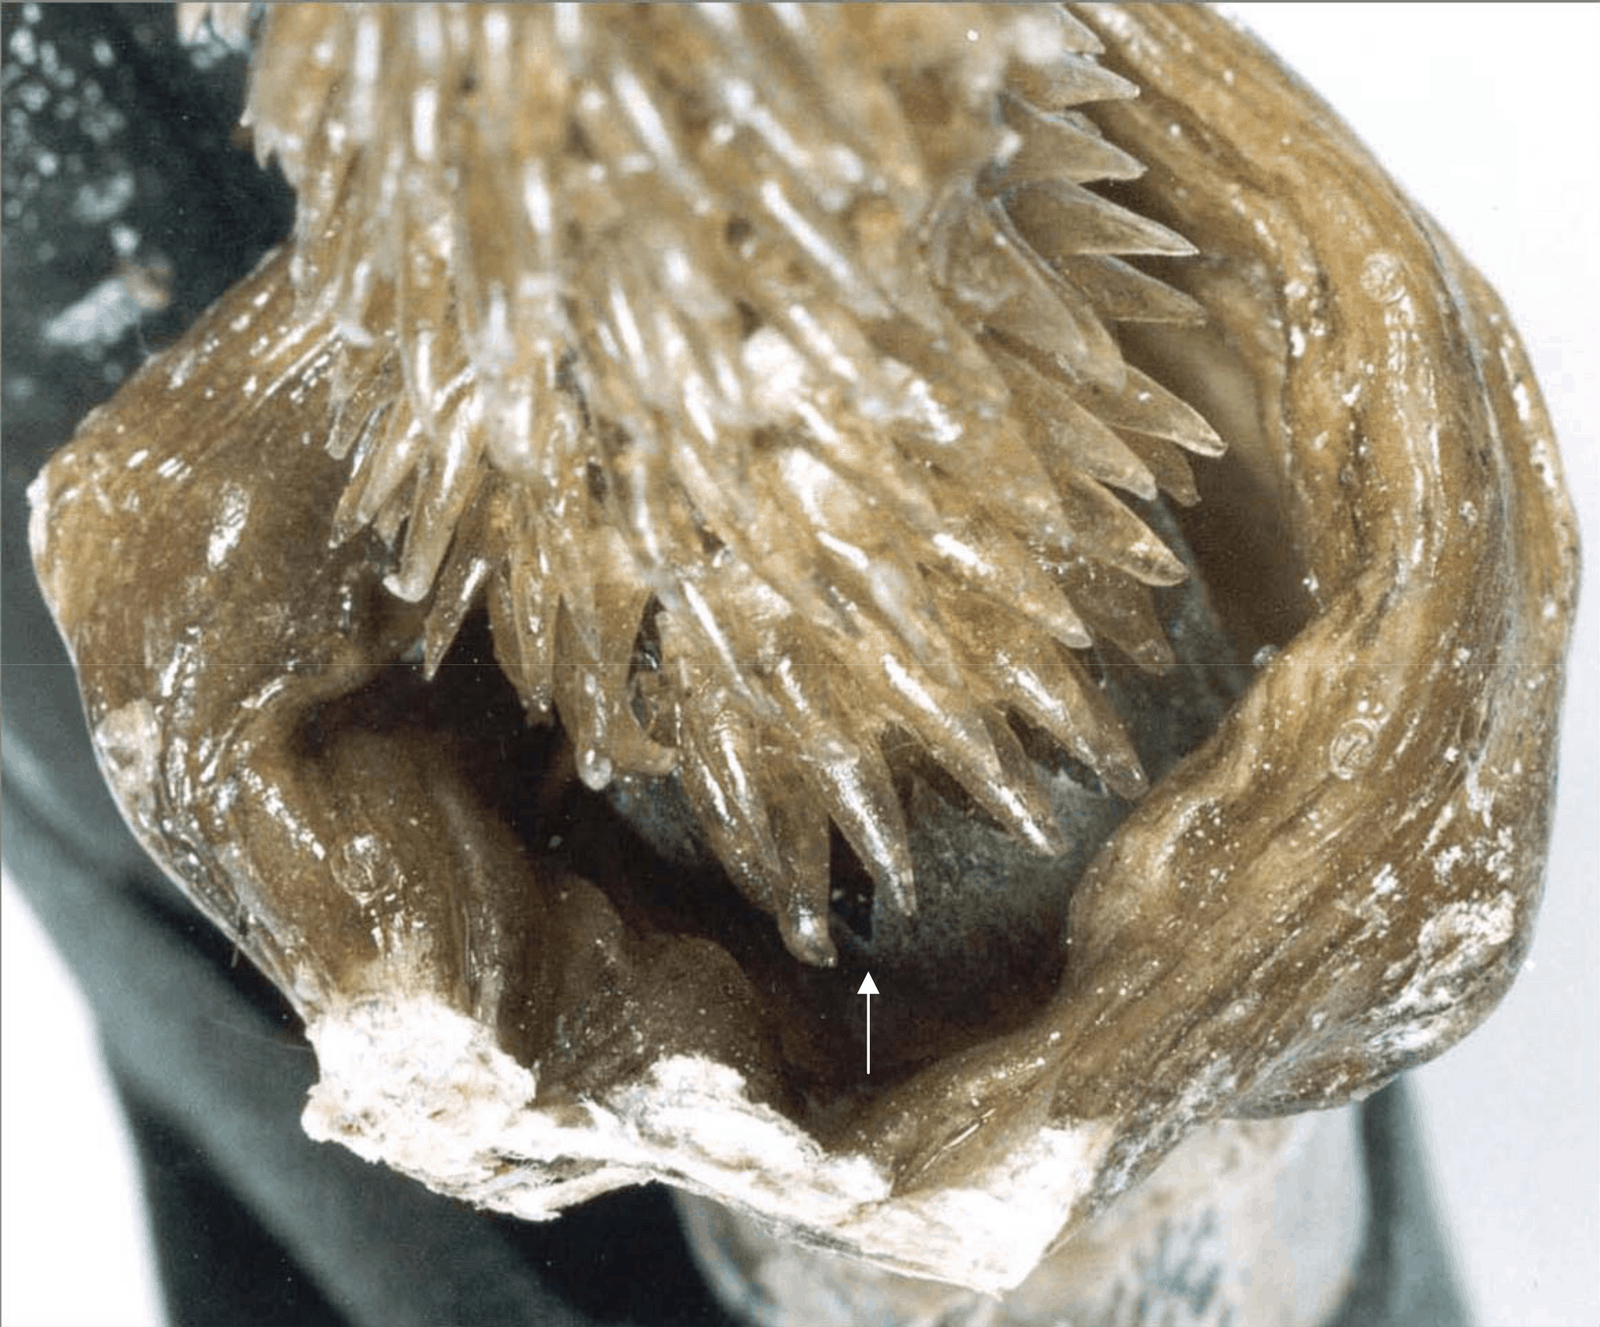 Figure 4: Looking at the base of a bull’s penis carved to simulate a tiger’s penis. This is how cattle genitals are made to be used as replacements for genuine tiger parts. Notice the V-shaped cuts in the tissue underneath the lowest barbs (arrow).